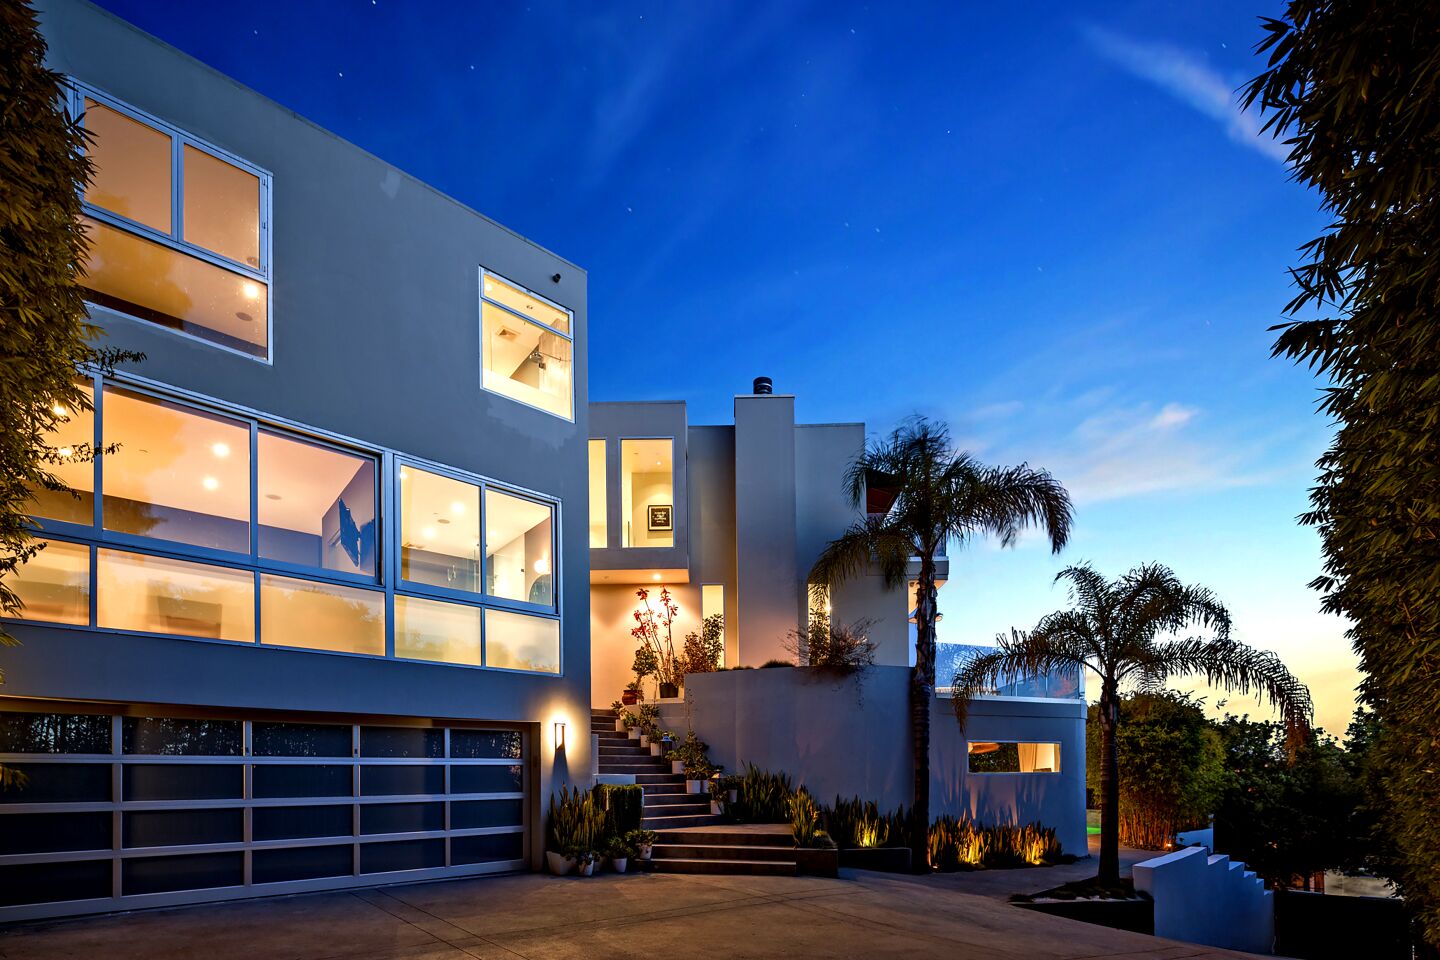 Harry Styles sold his contemporary bachelor pad in the Hollywood Hills for $6 million.